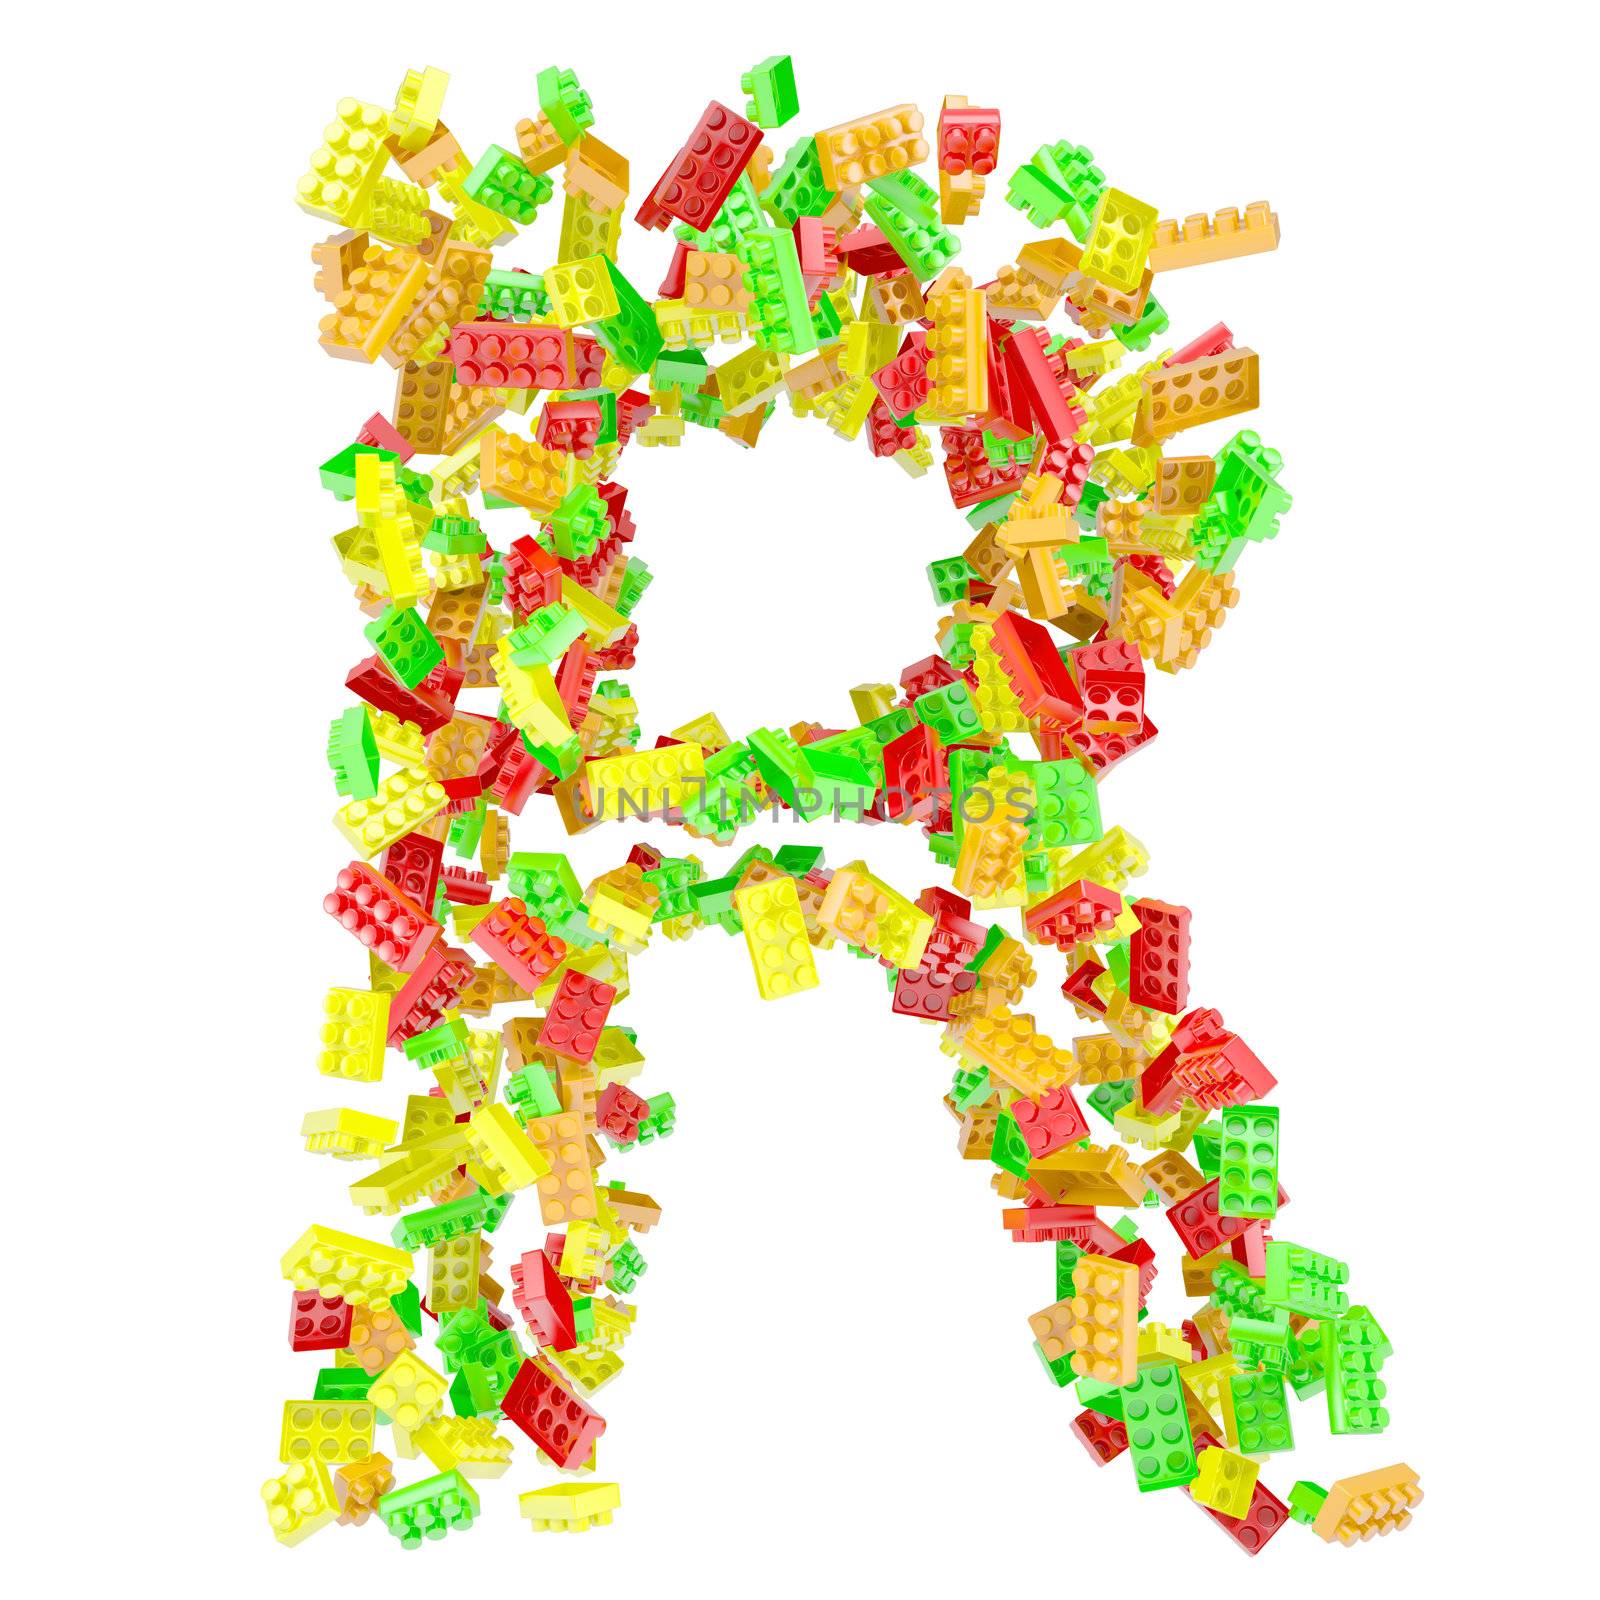 The letter R is made up of children's blocks. Isolated render on a white background